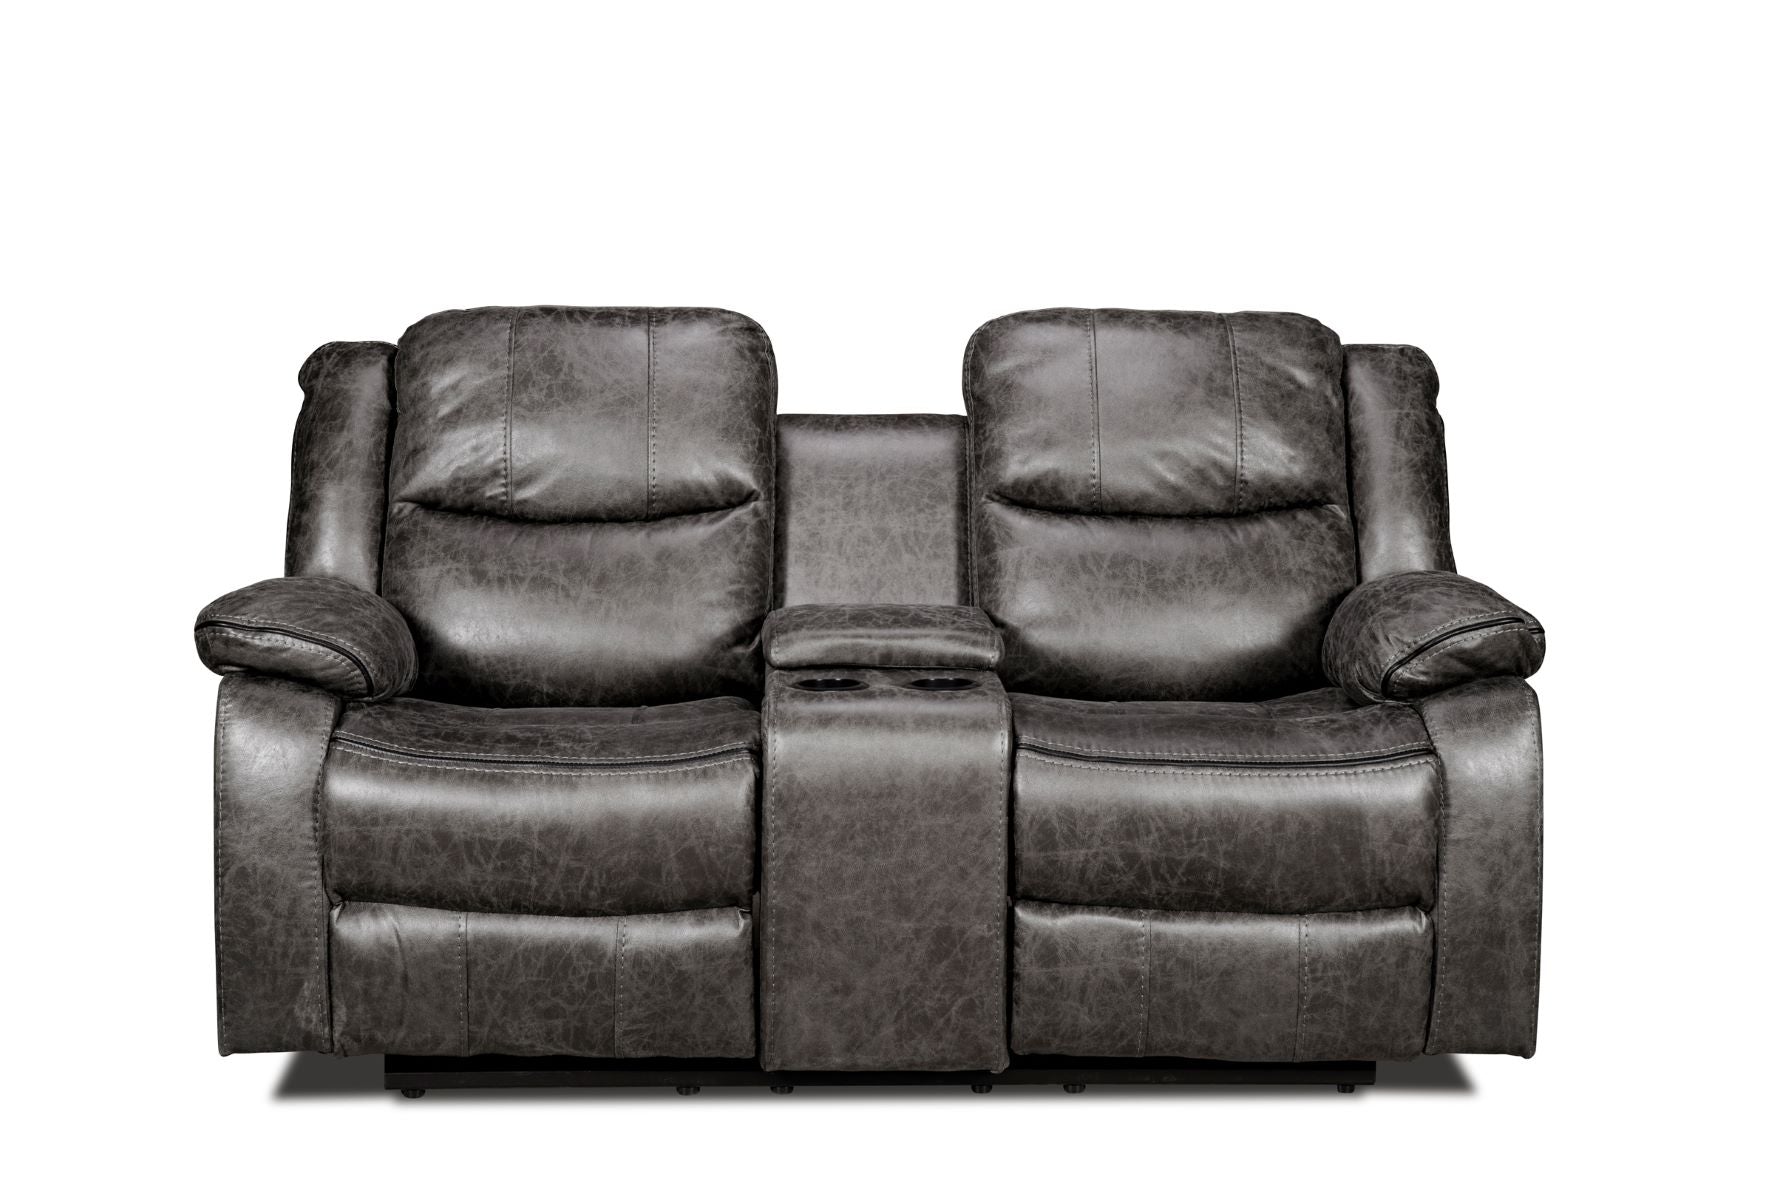 Everett reclining sofa collection 99849GRY